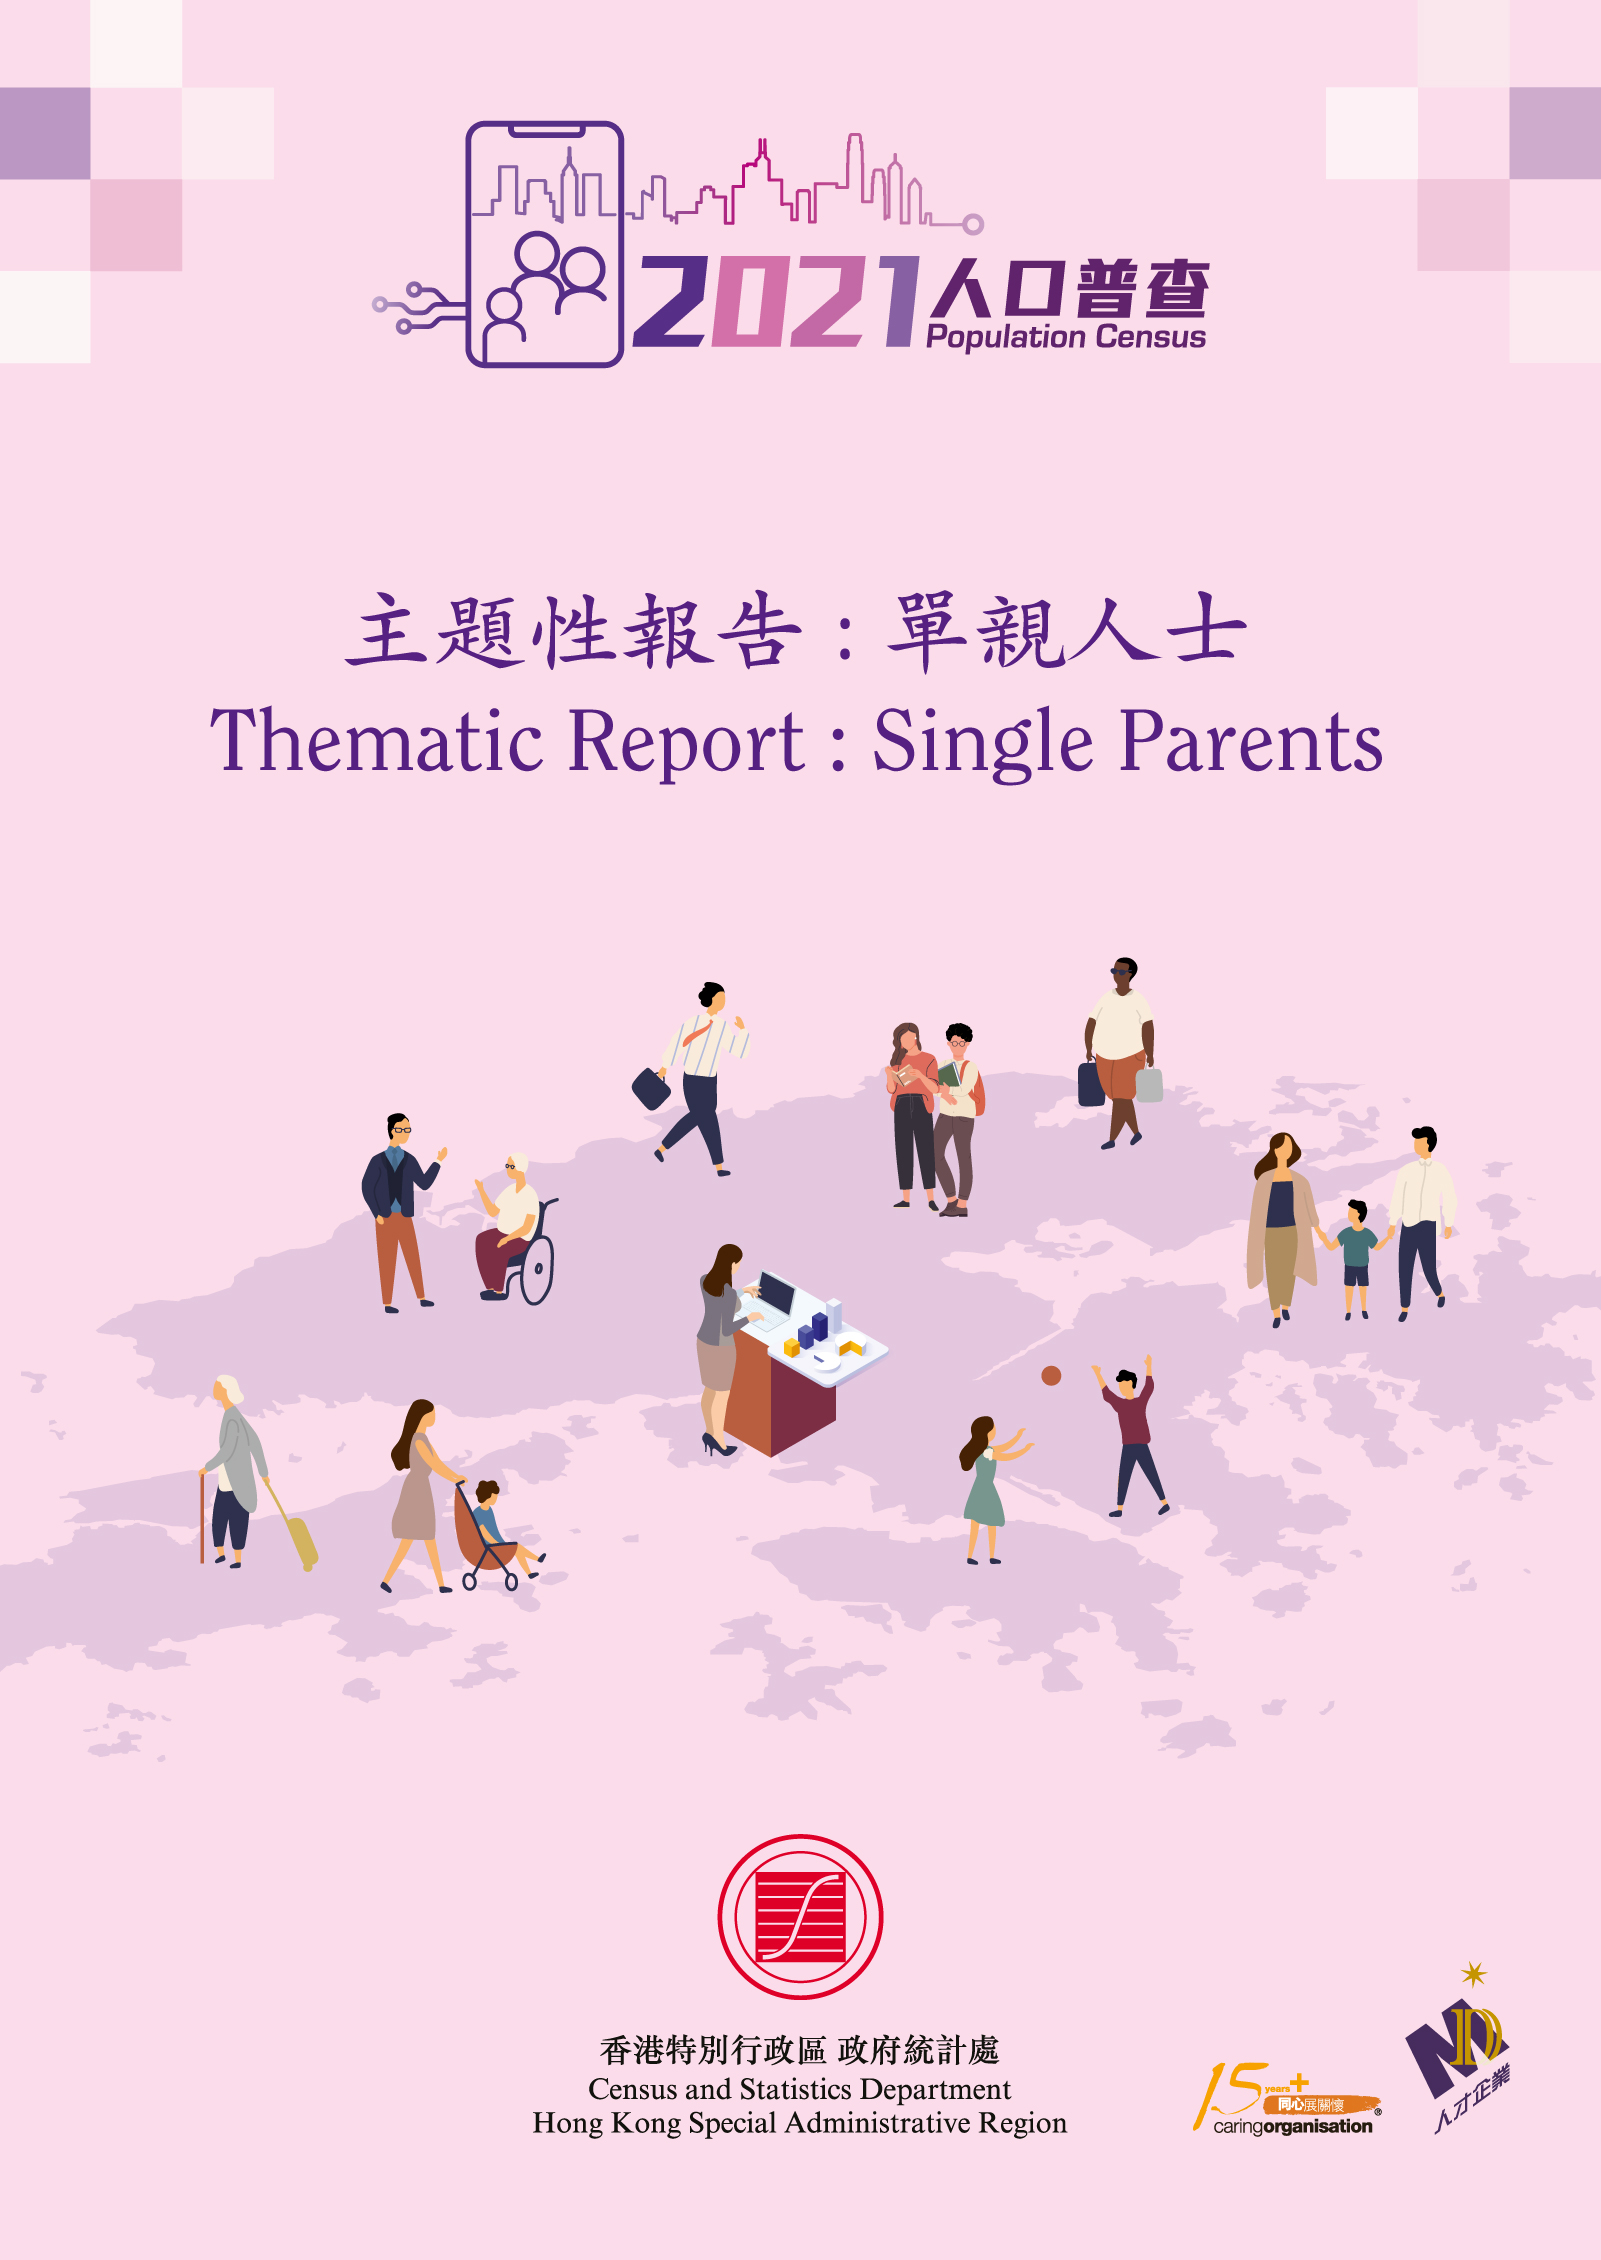 Thematic Report: Single Parents